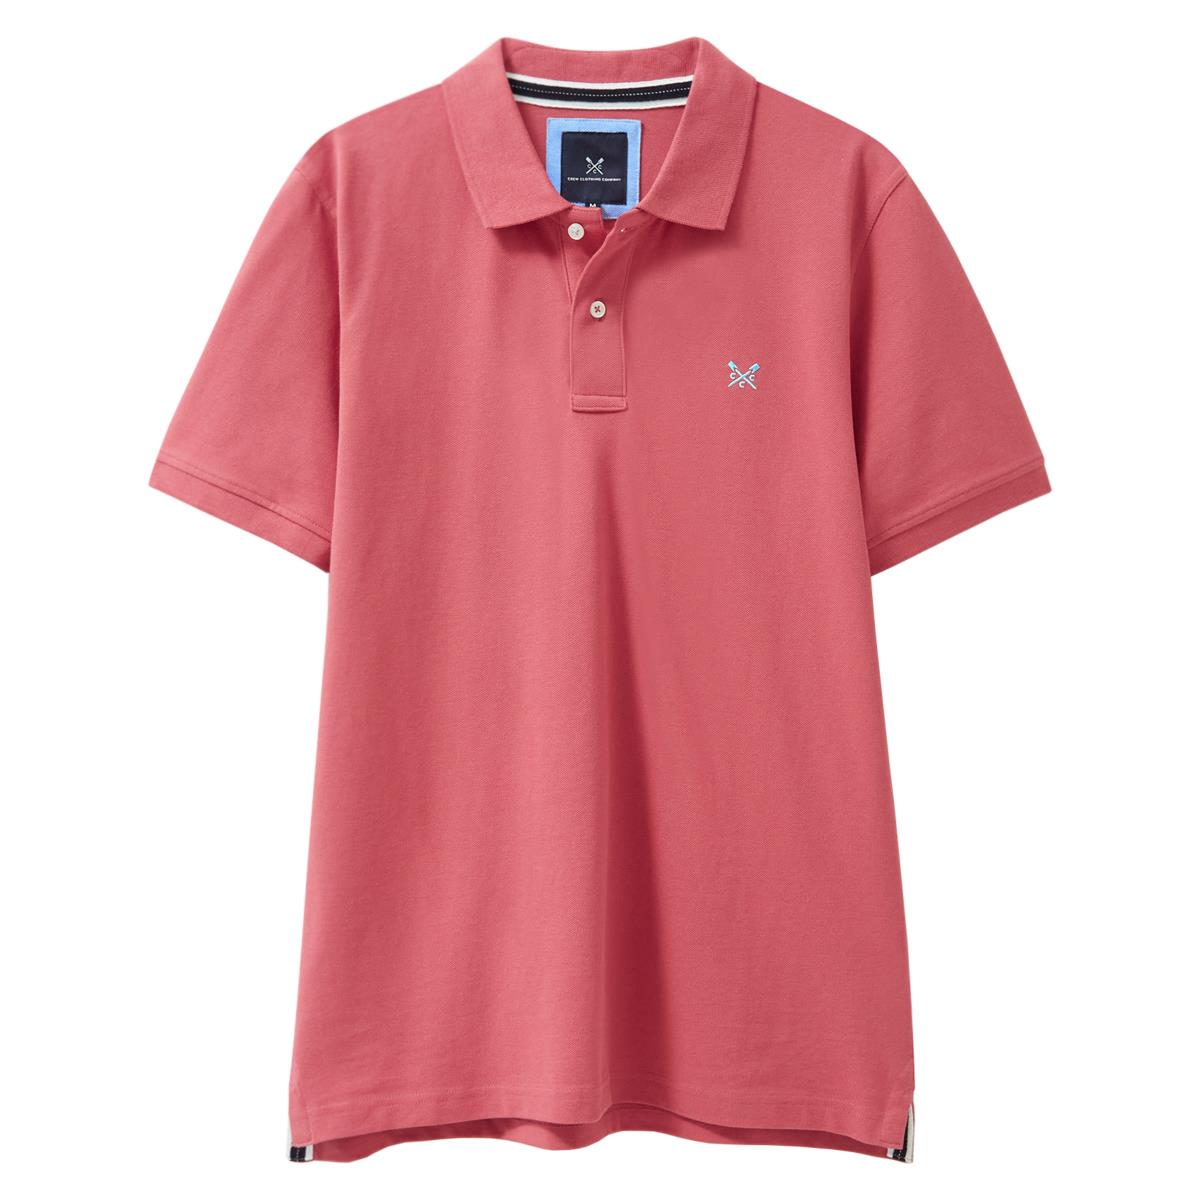 What makes Crew Clothing's classic pique polo stand out among crew polo shirts?